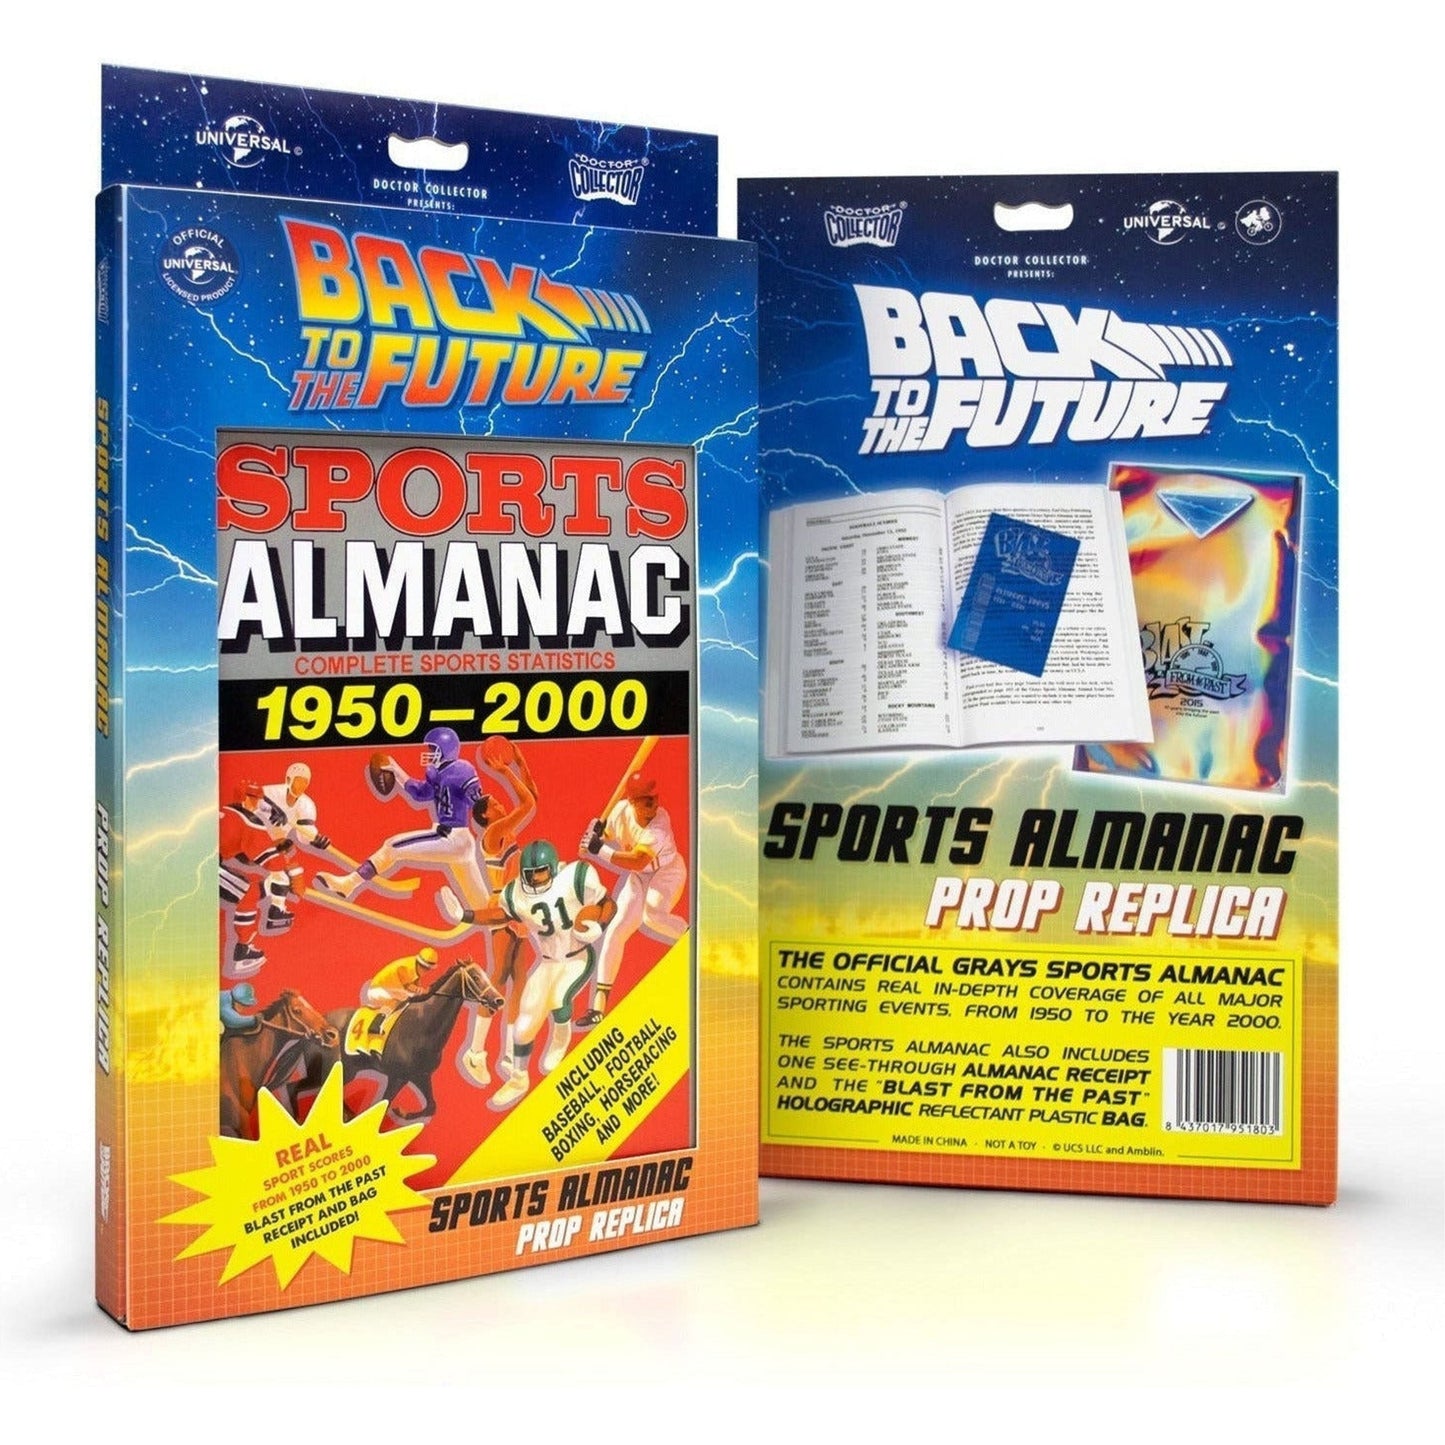 The Time Almanac 2000: With Information Please : The Millennium Collector's  Edition